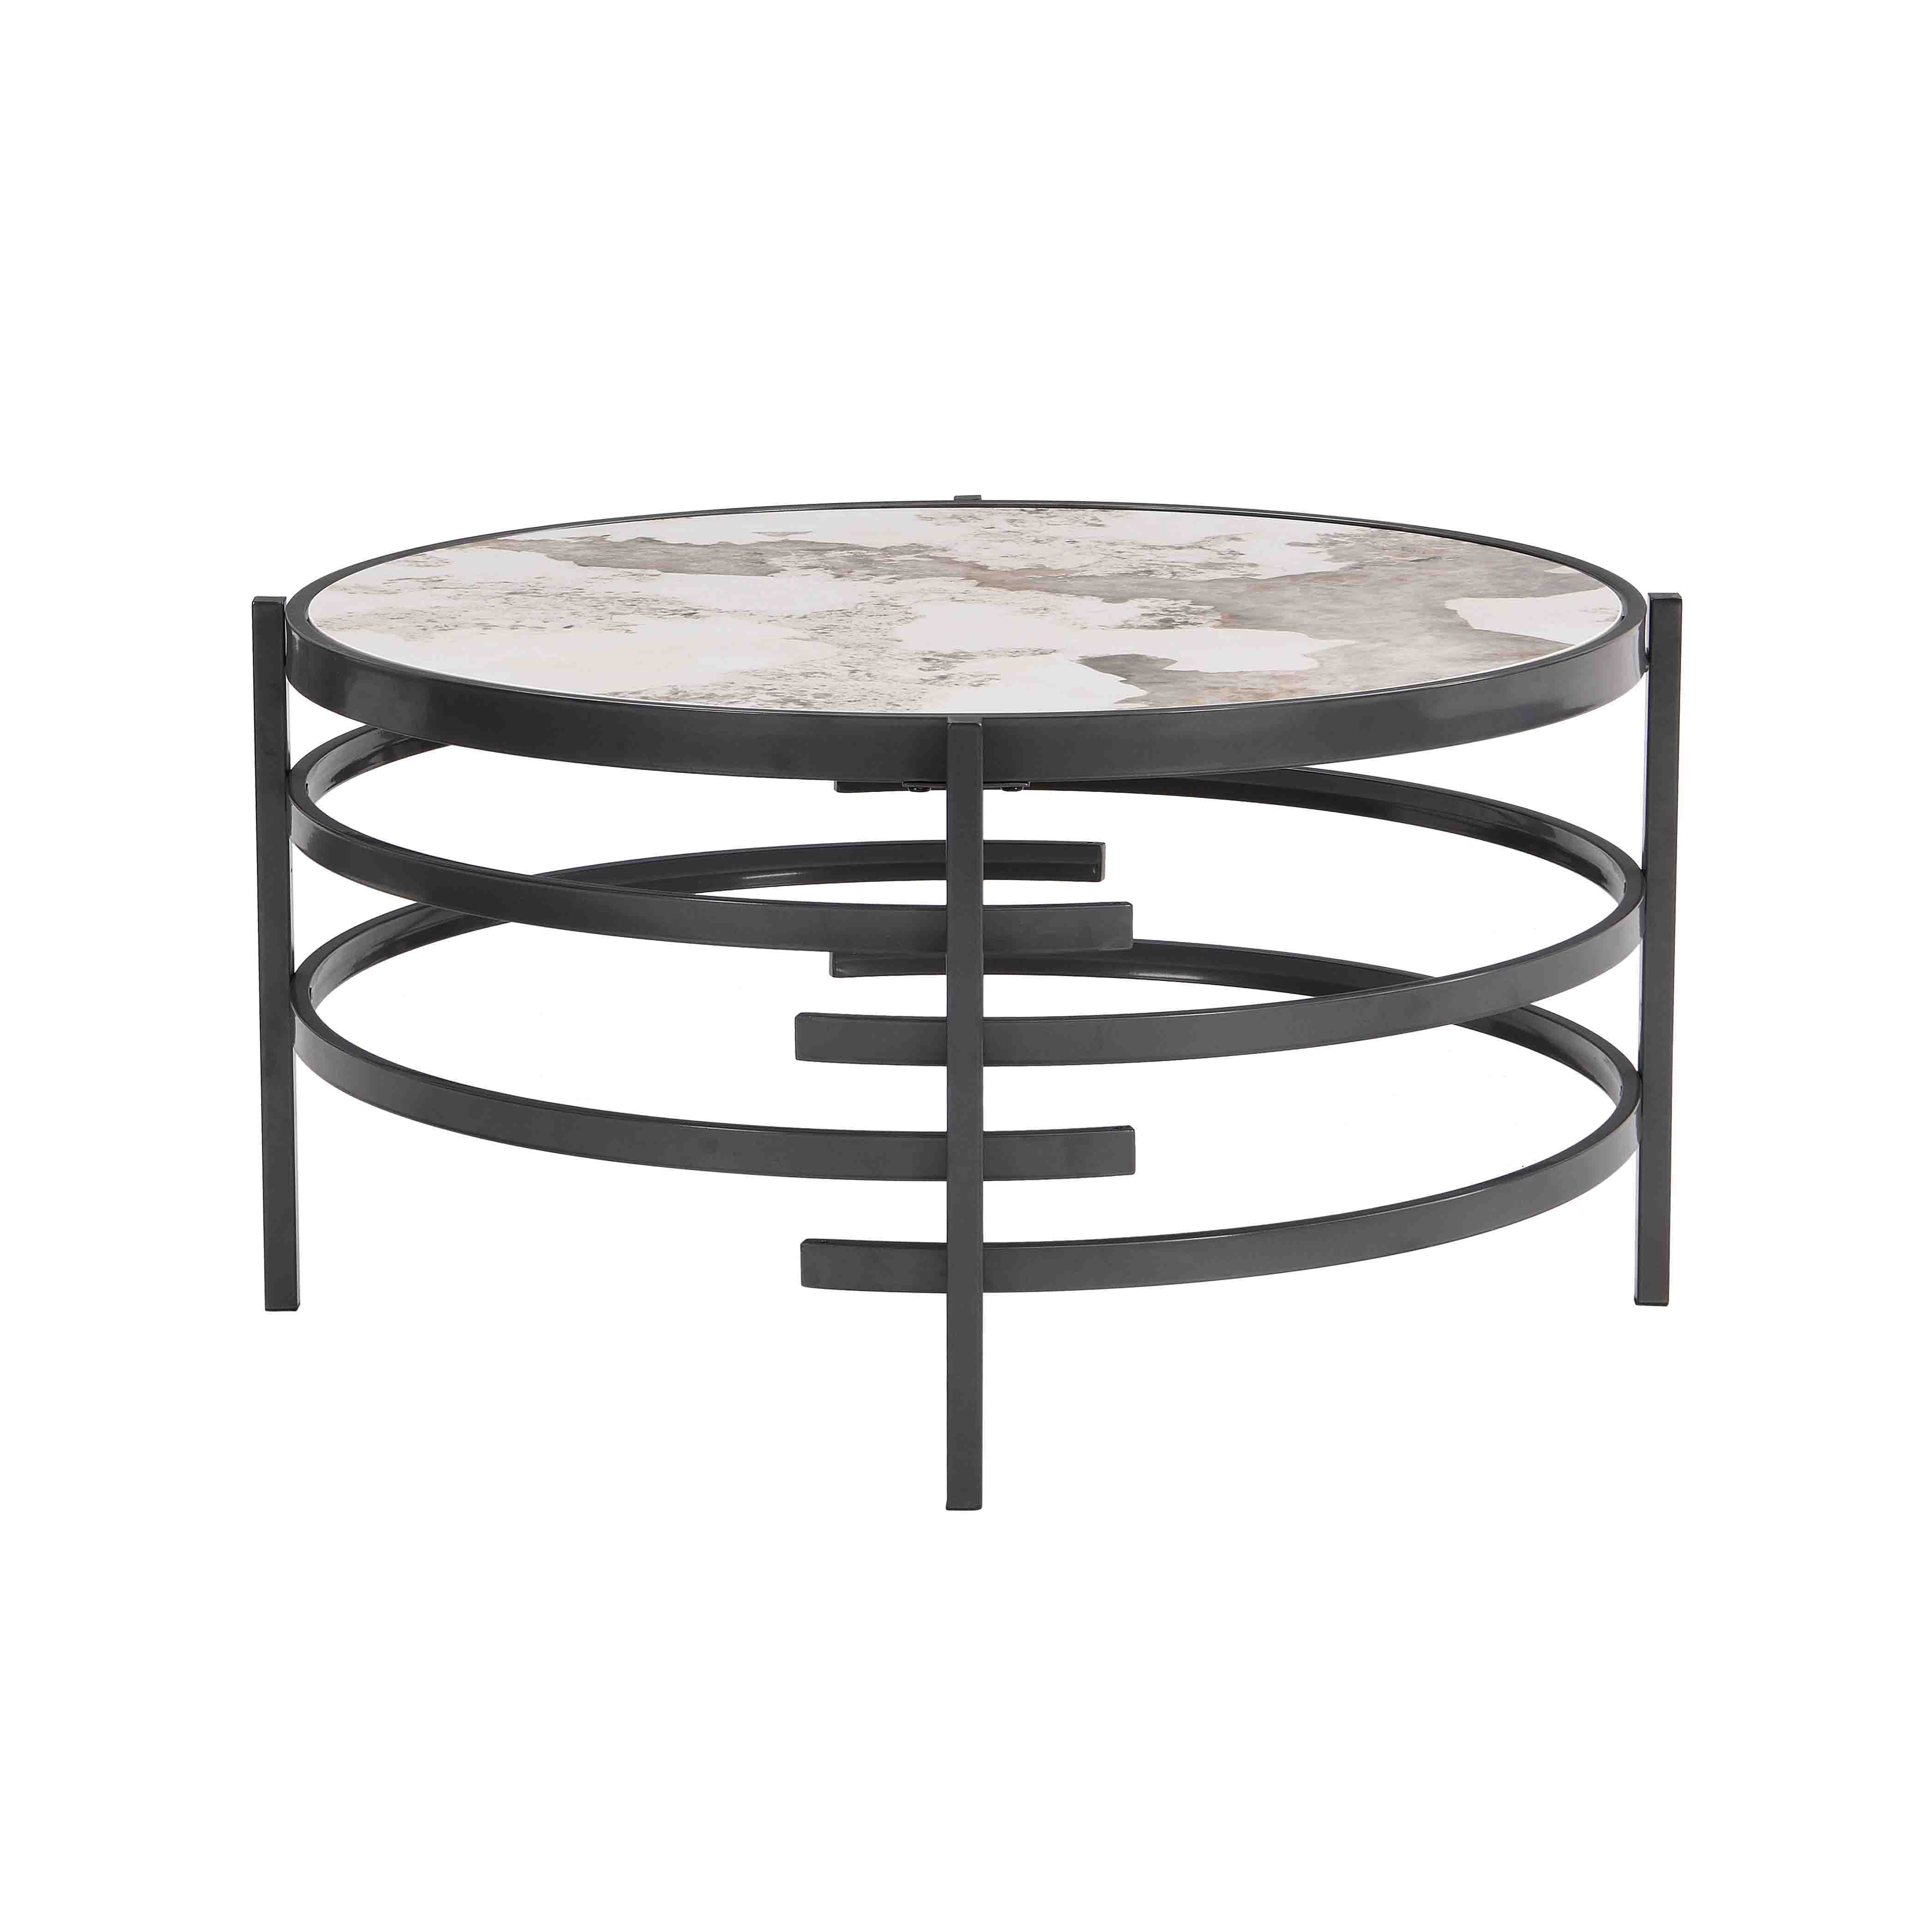 32.48'' Round Coffee Table With Sintered Stone Top&Sturdy Metal Frame, Modern Coffee Table For Living Room - Darker Gray